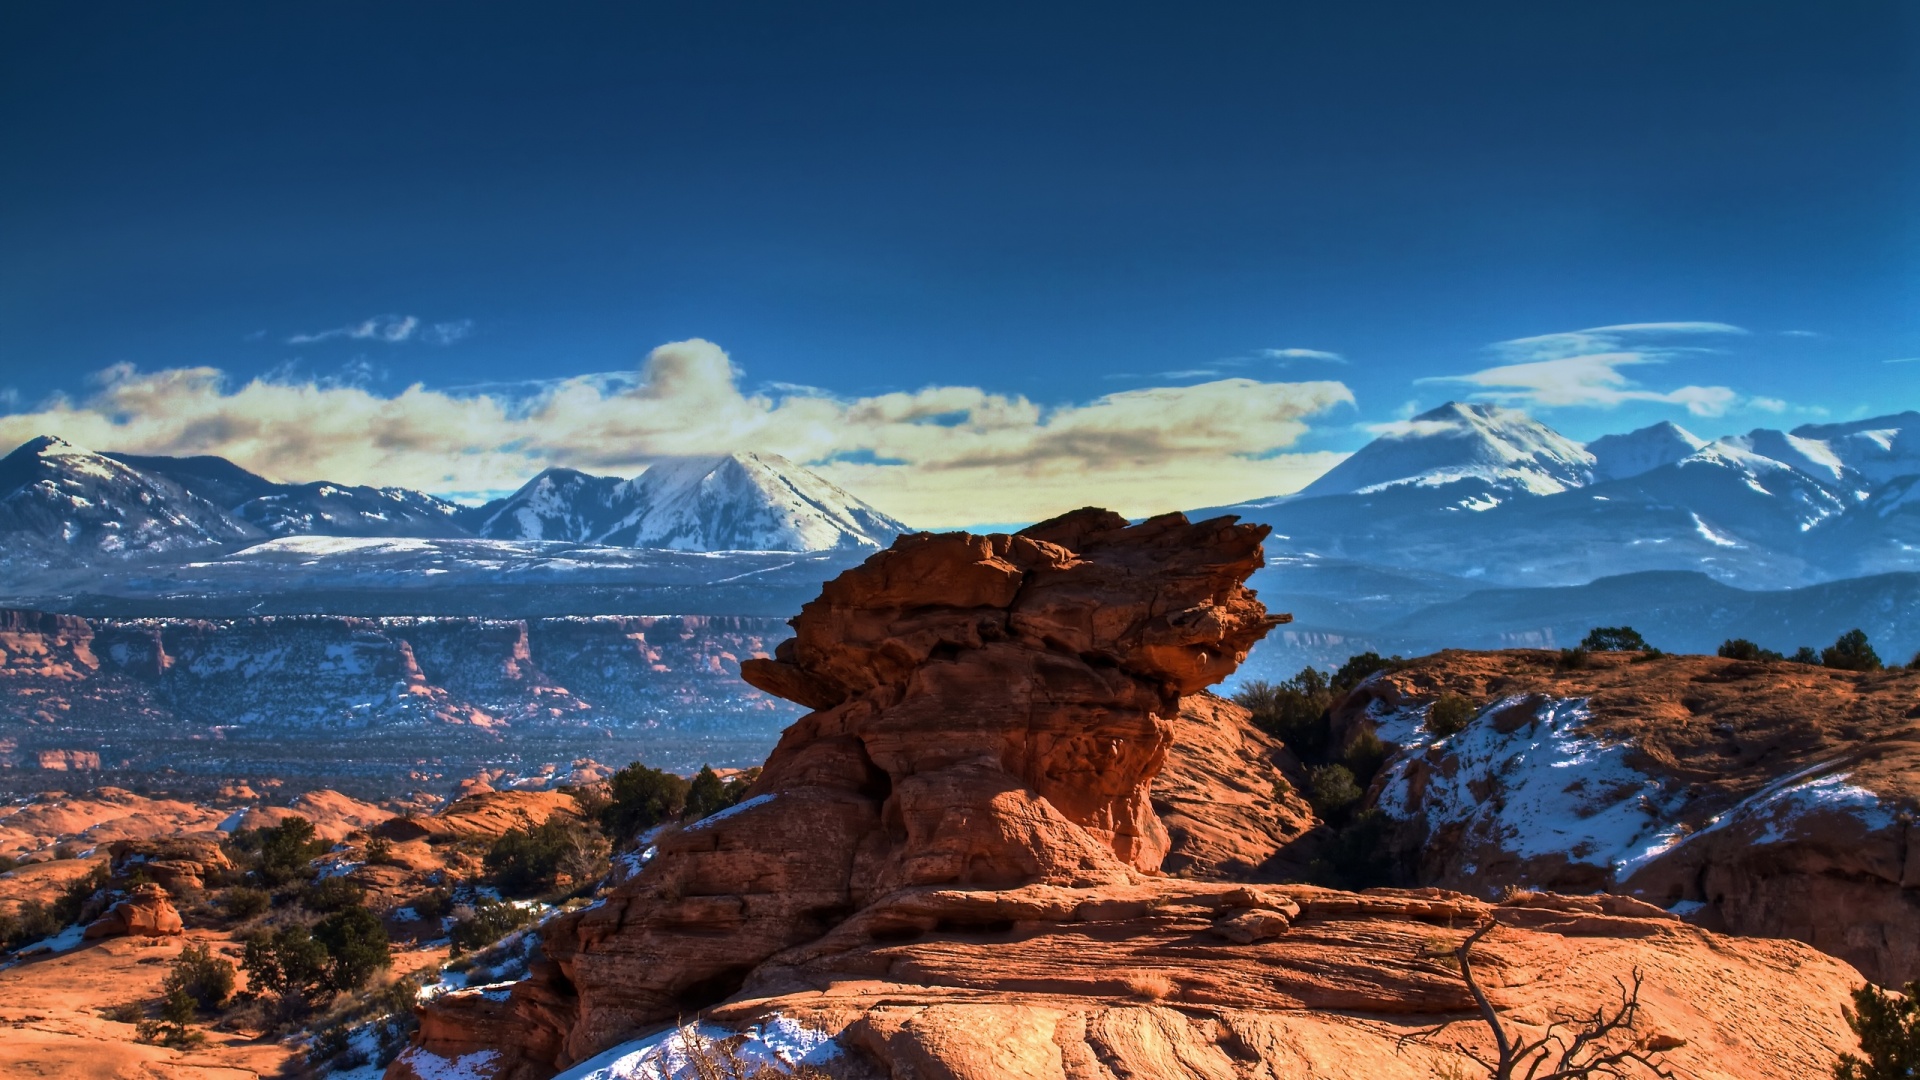 Moab Utah Mountains   High Definition Wallpapers   HD wallpapers